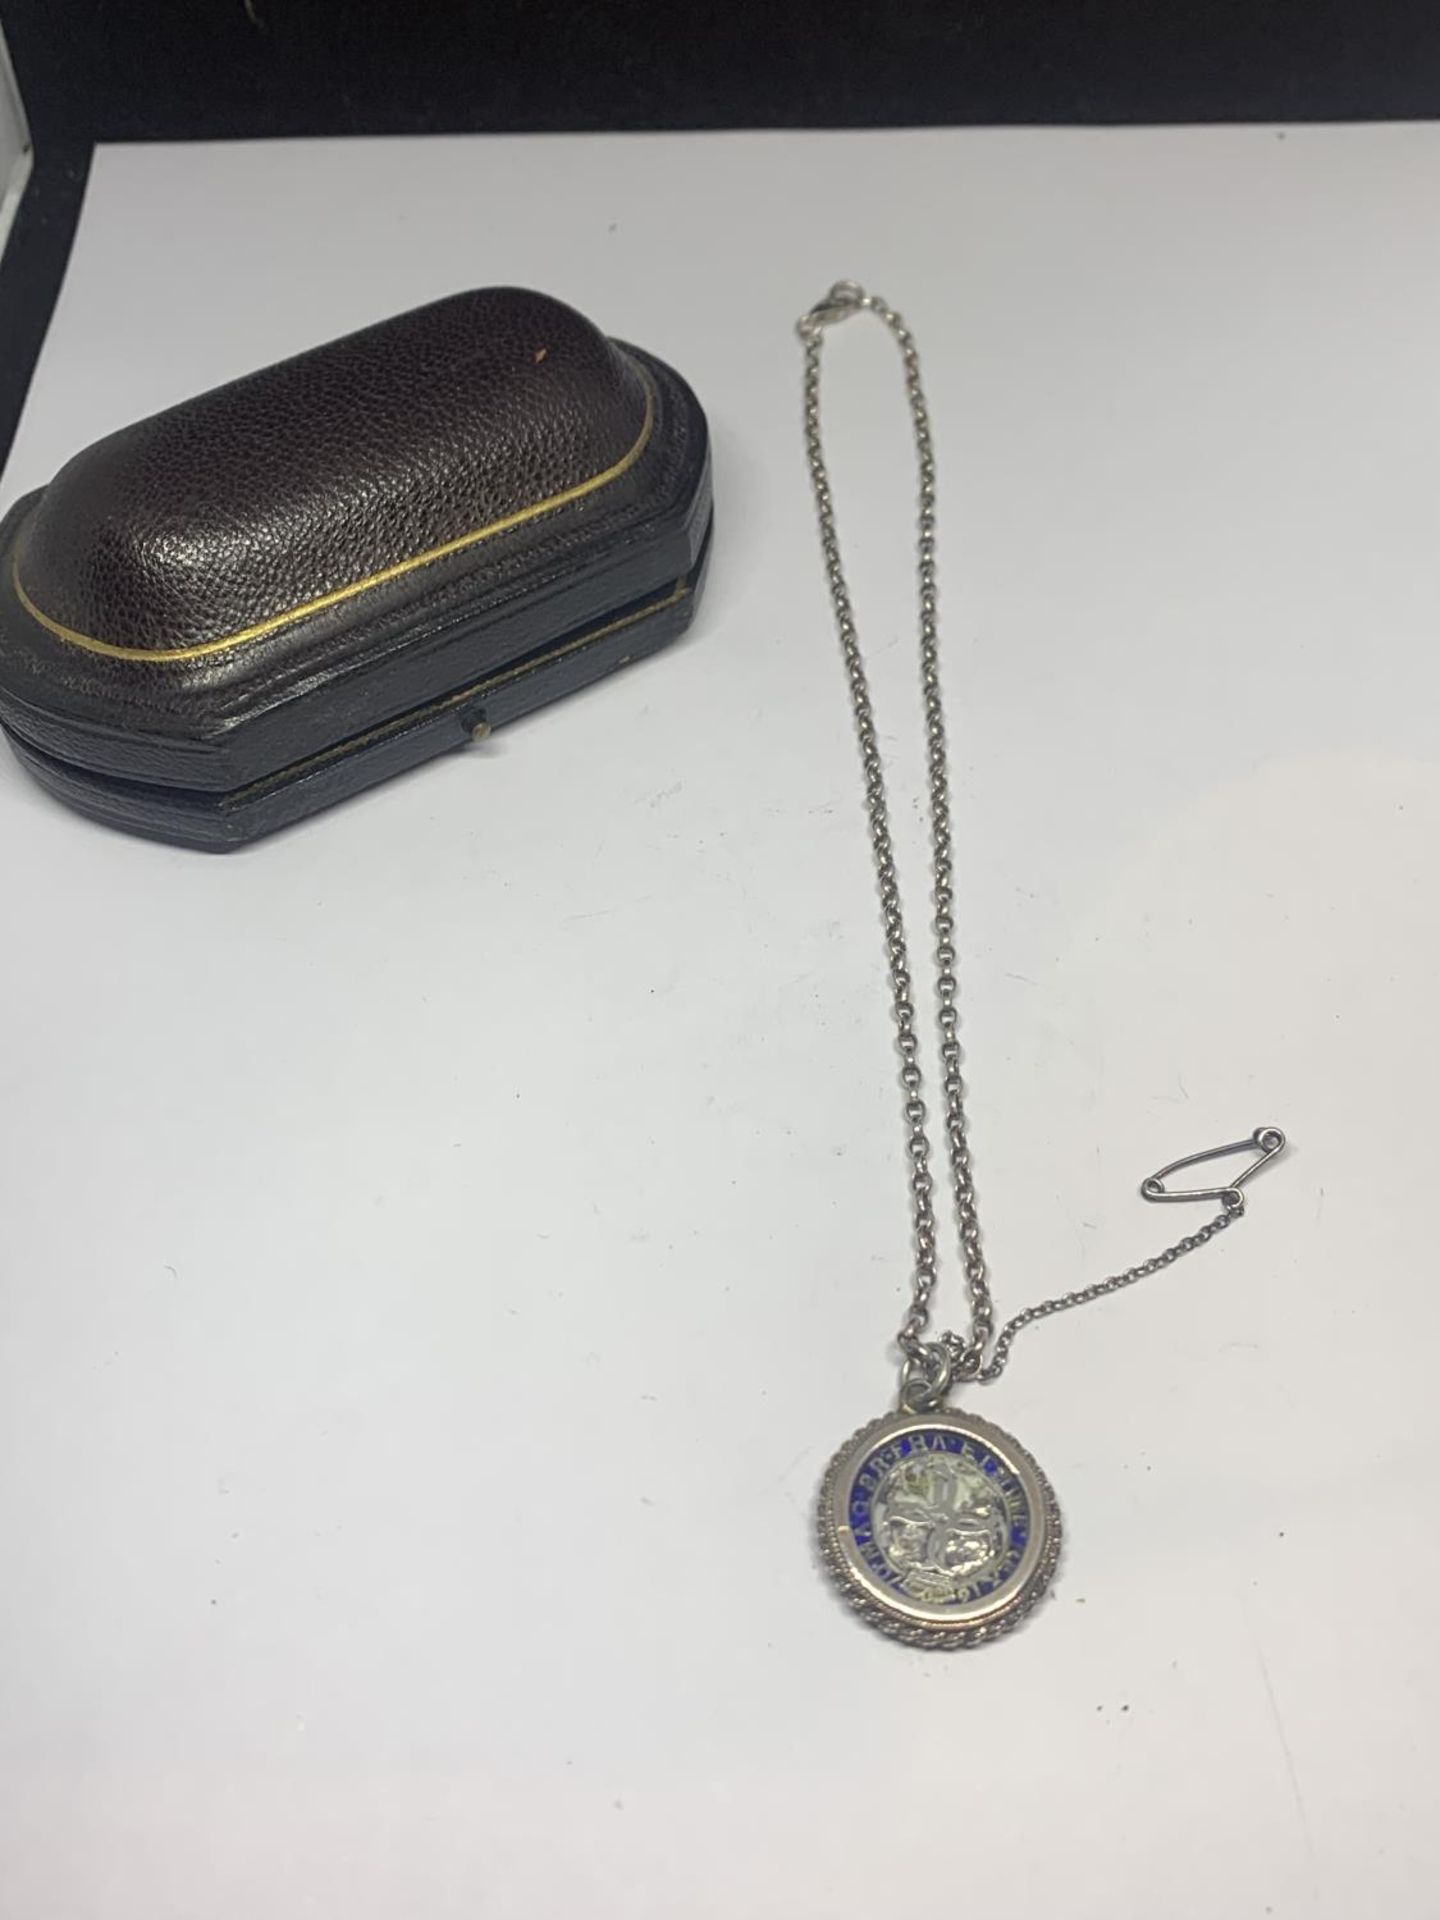 A SILVER GEORGE III FOUR PENCE IN A MOUNT ON A CHAIN WITH A PRESENTATION BOX